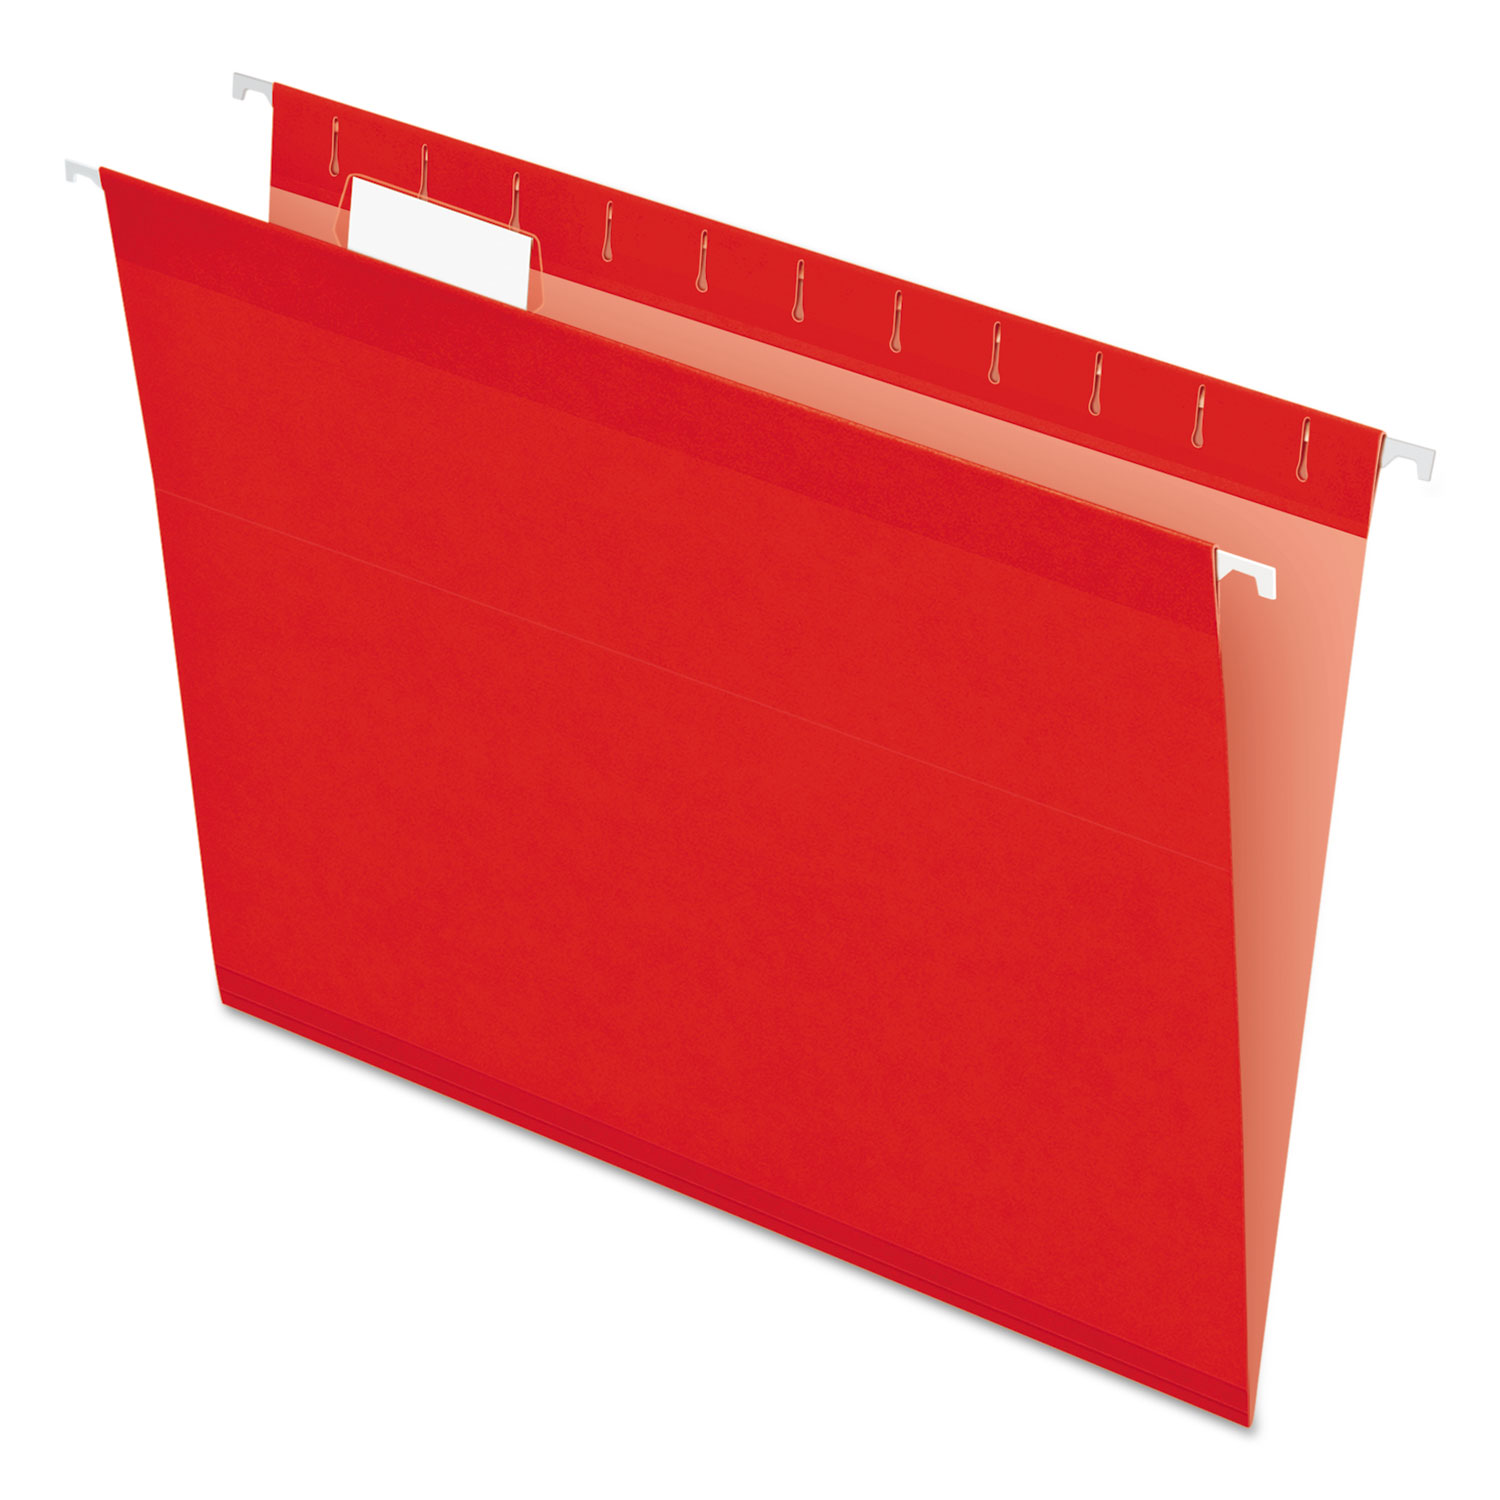  Pendaflex 04152 1/5 RED Colored Reinforced Hanging Folders, Letter Size, 1/5-Cut Tab, Red, 25/Box (PFX415215RED) 